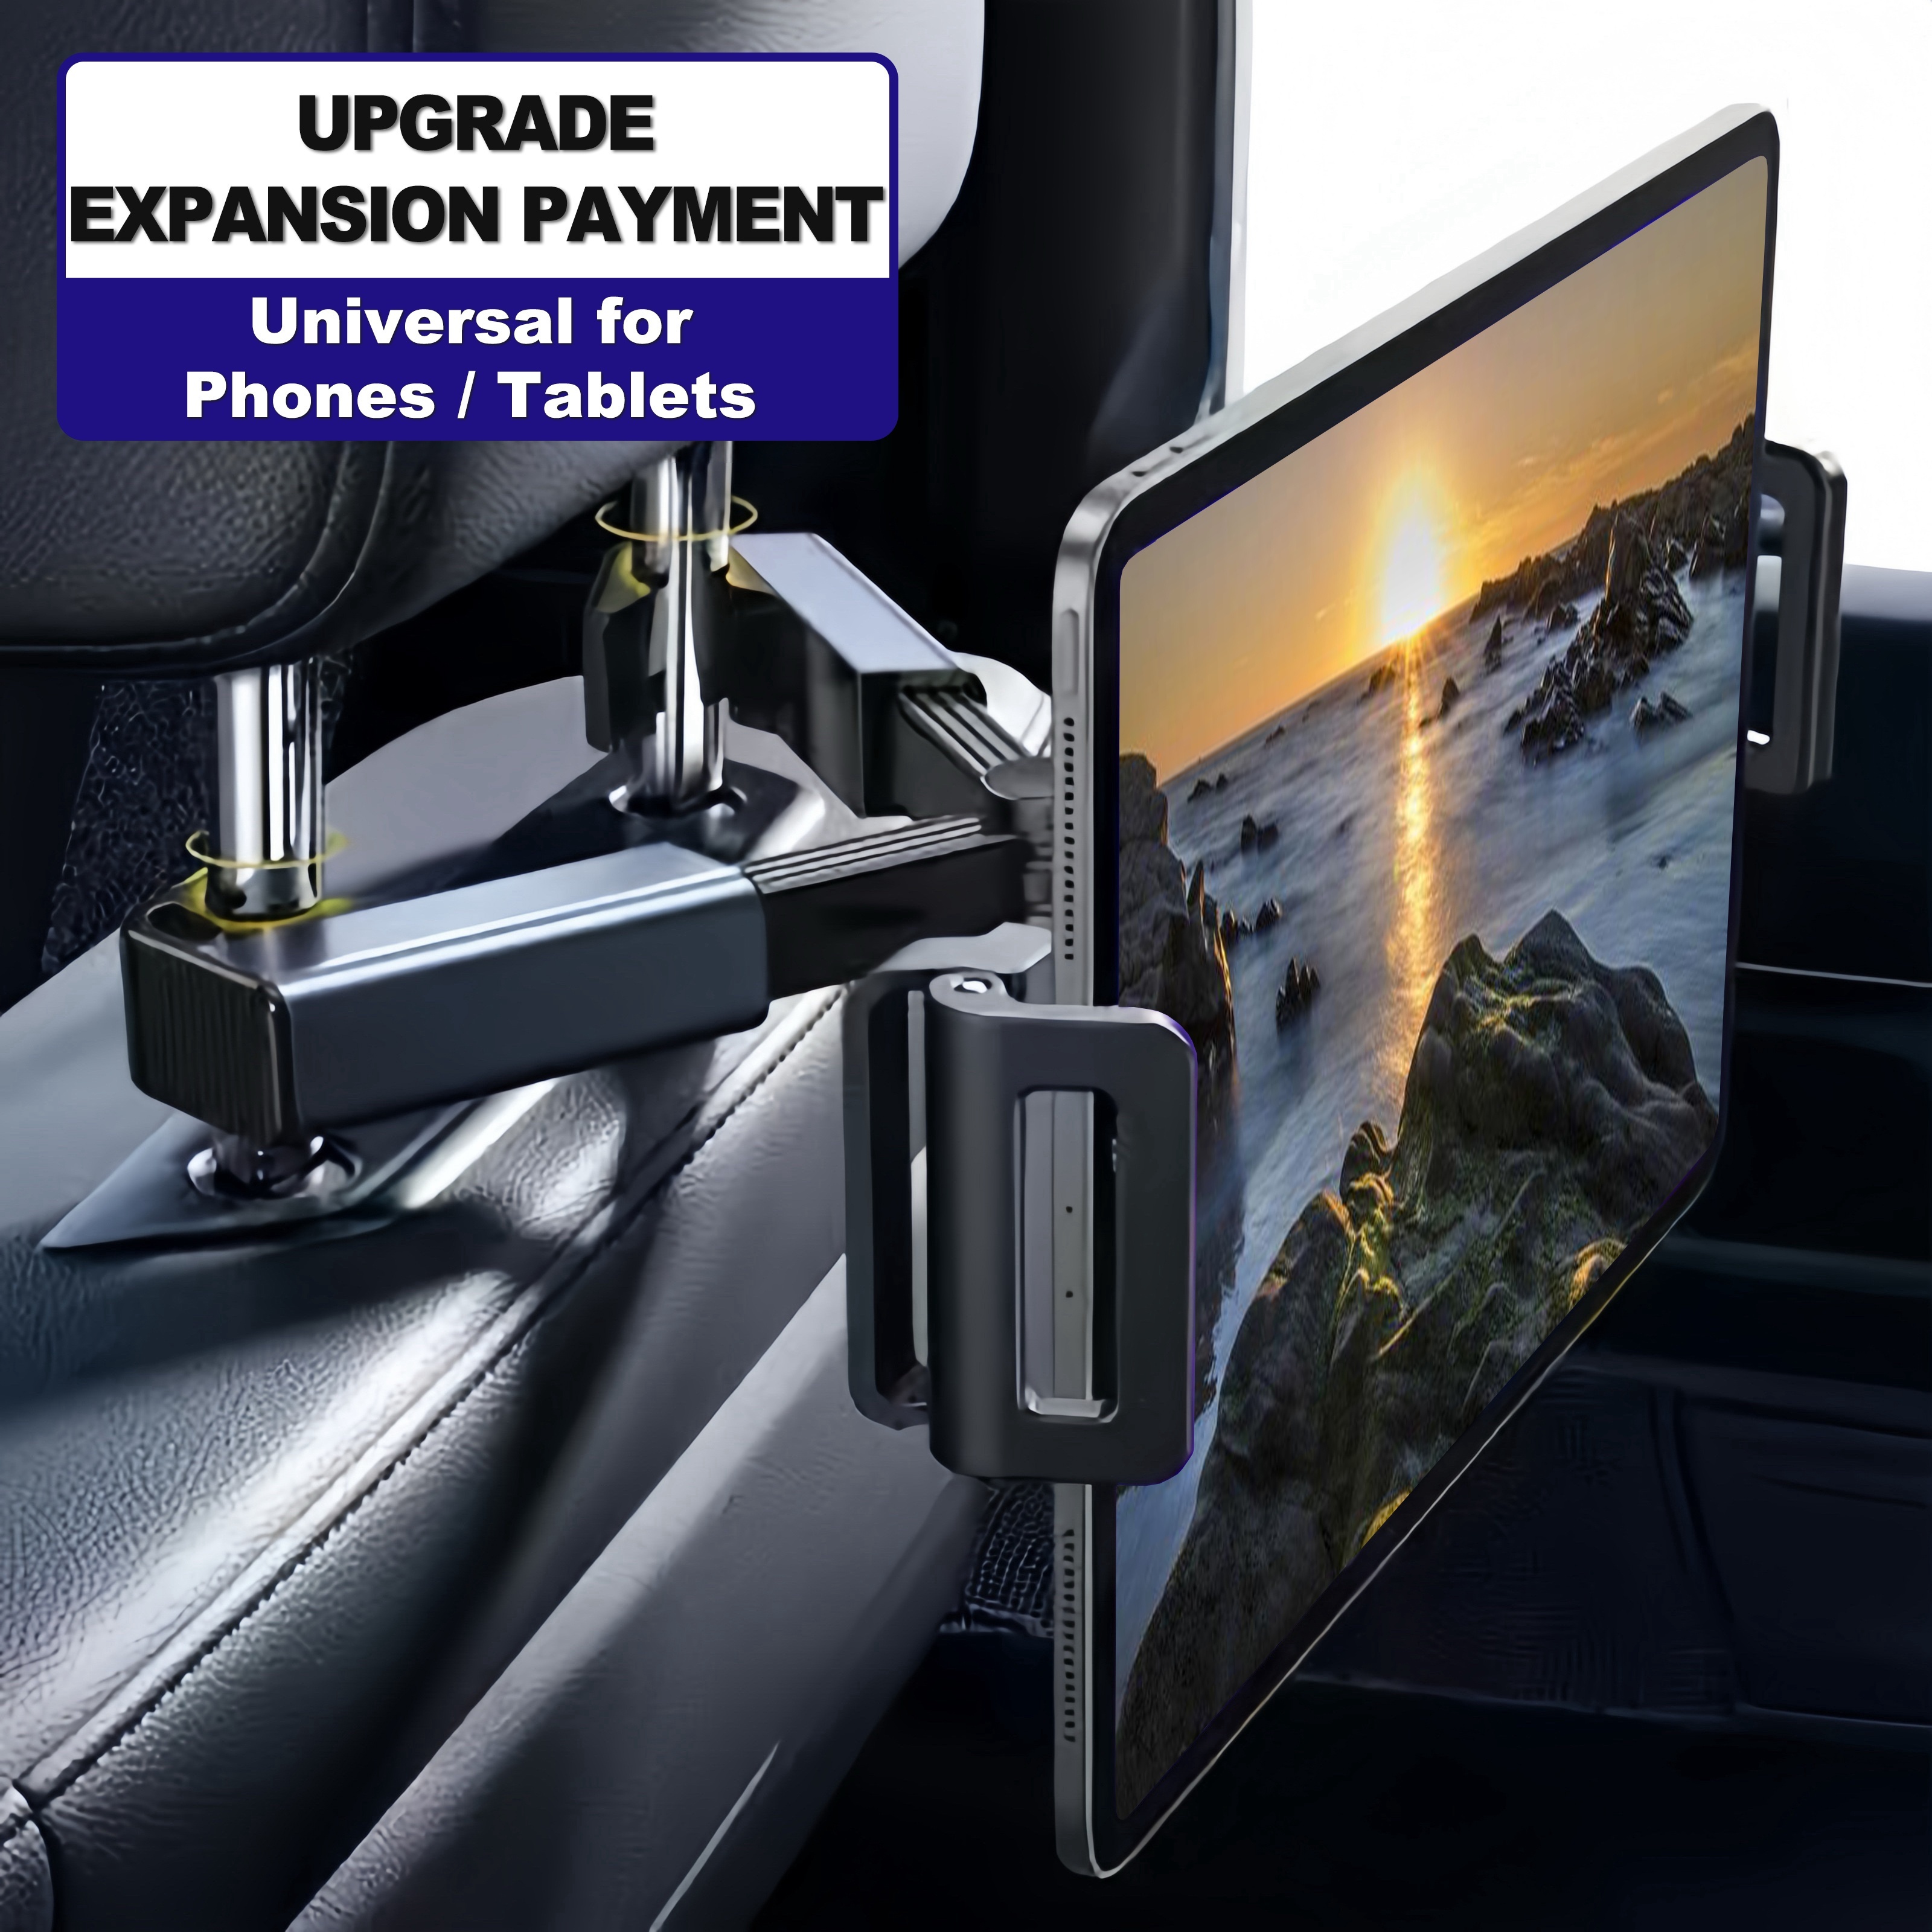 

360° Rotating Universal Holder: Universal, Safe And Rotatable Holder For Mobile Phones/tablets, Ideal For Rear Seat Entertainment! Perfect For Birthday Gifts, Christmas, Easter, President's Day, Etc.!